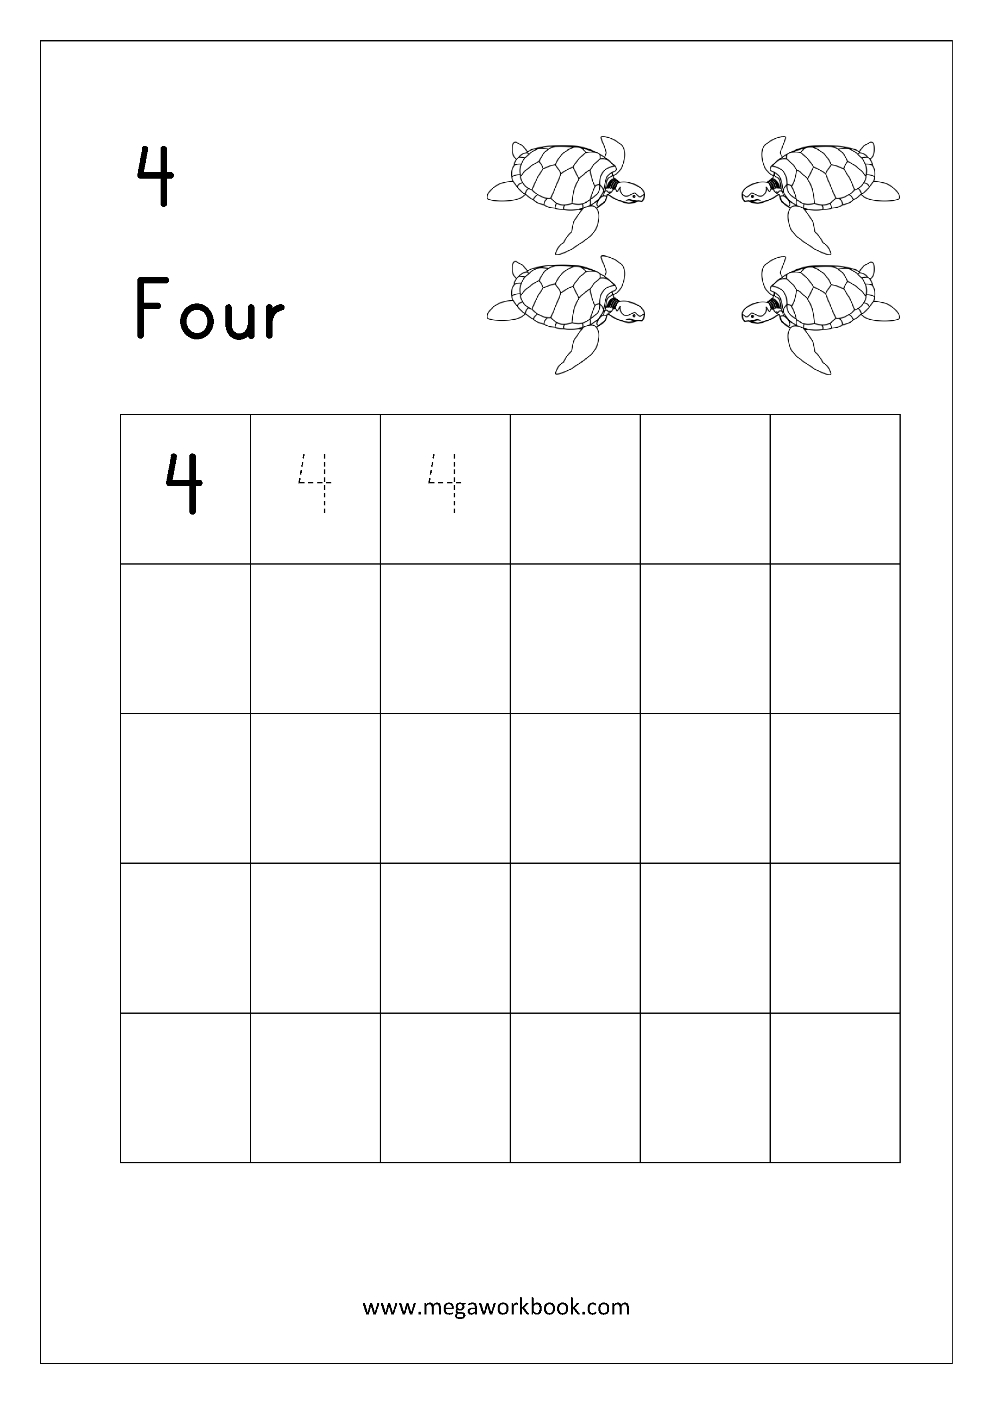 Free Printable Number Tracing And Writing 110 Worksheets  Number Pertaining To Number 4 Worksheets